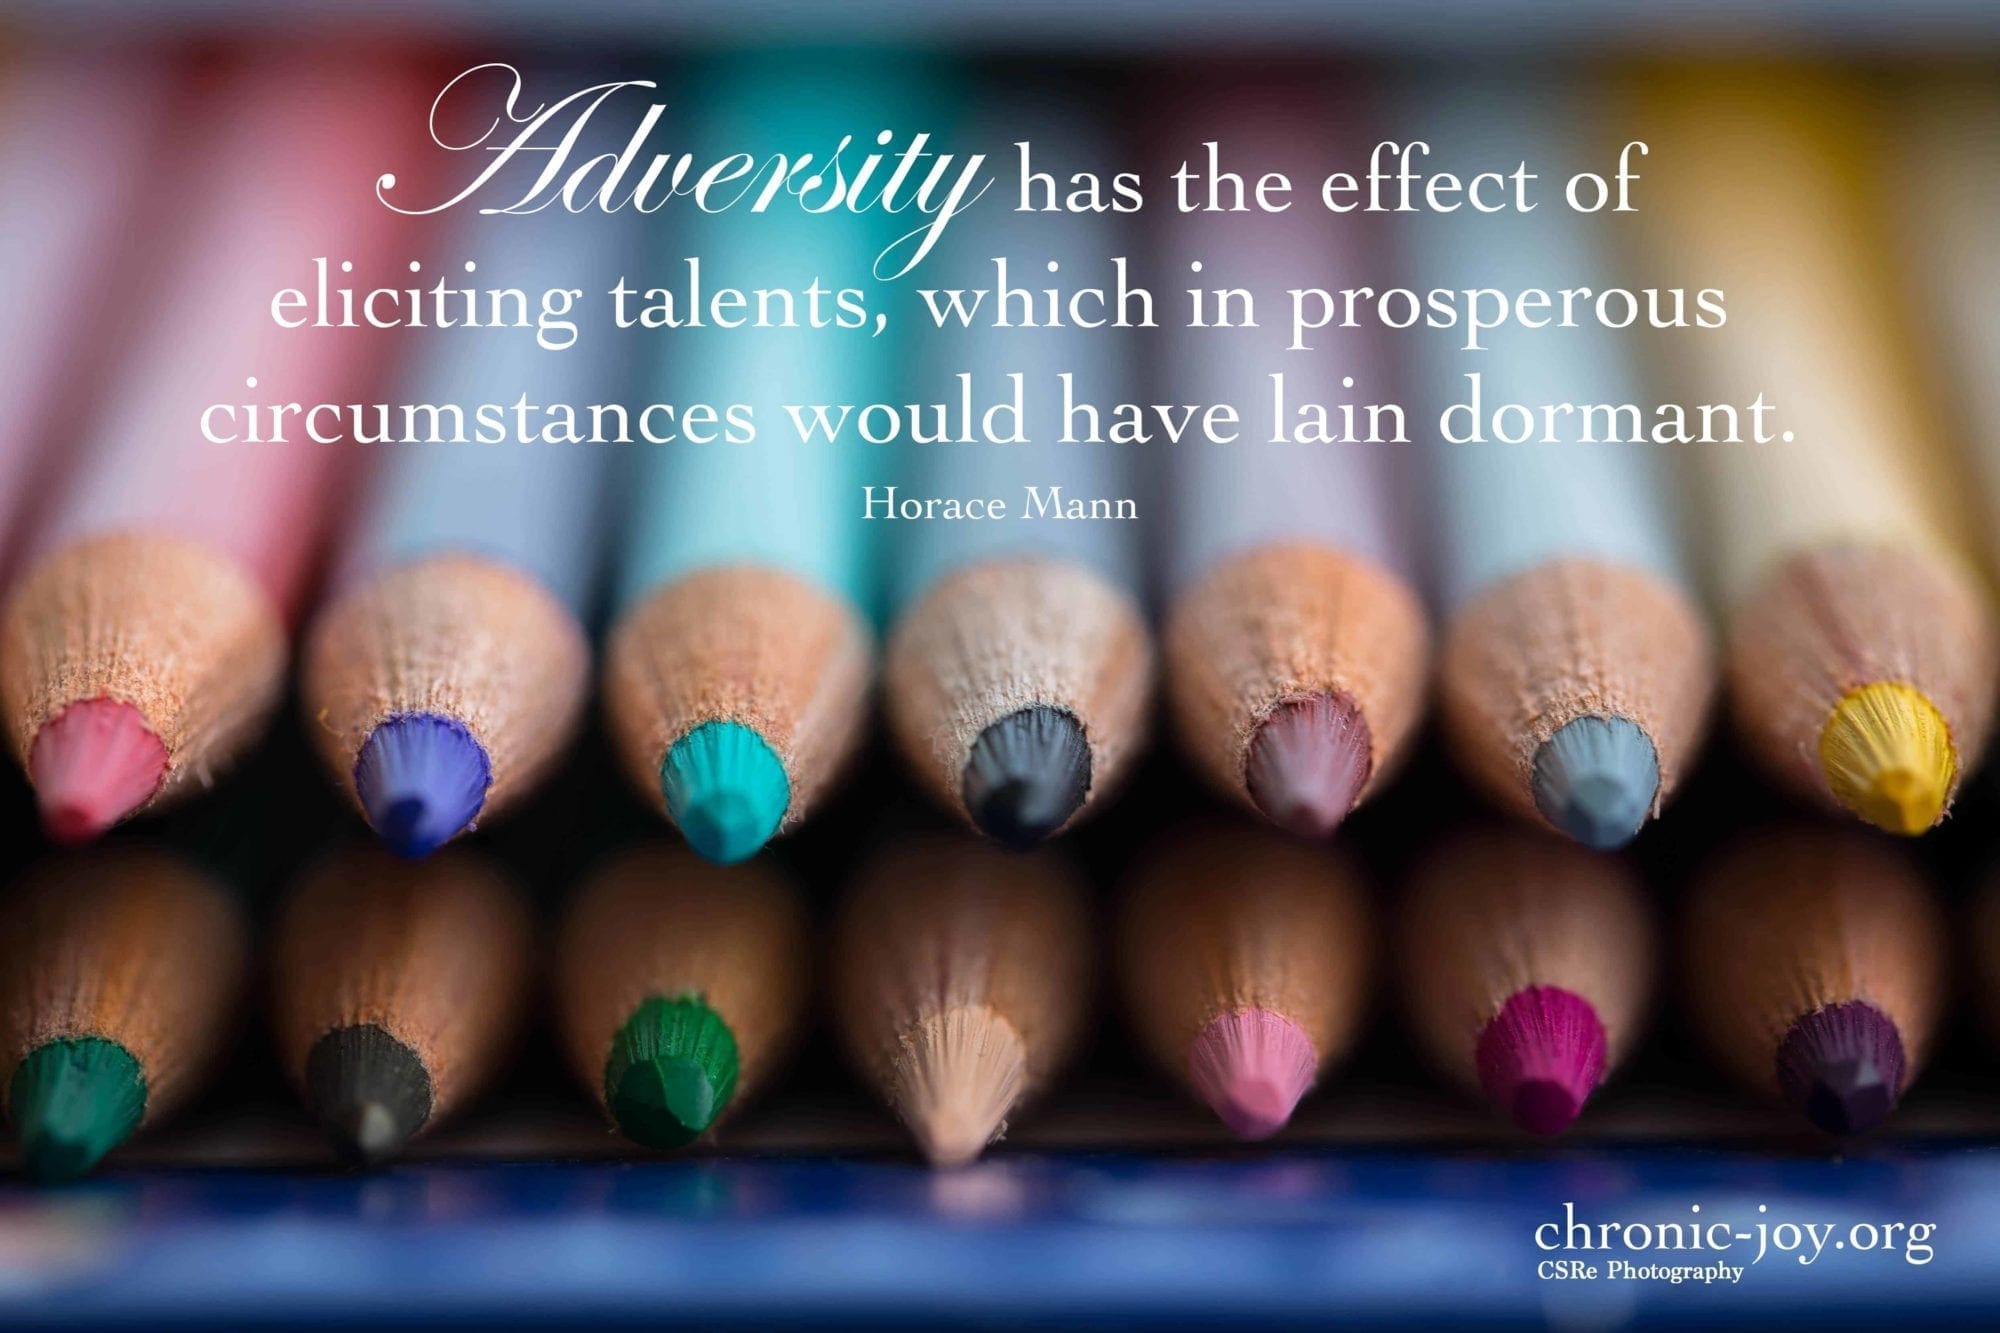 “Adversity has the effect of eliciting talents, which in prosperous circumstances would have lain dormant.” Horace Mann